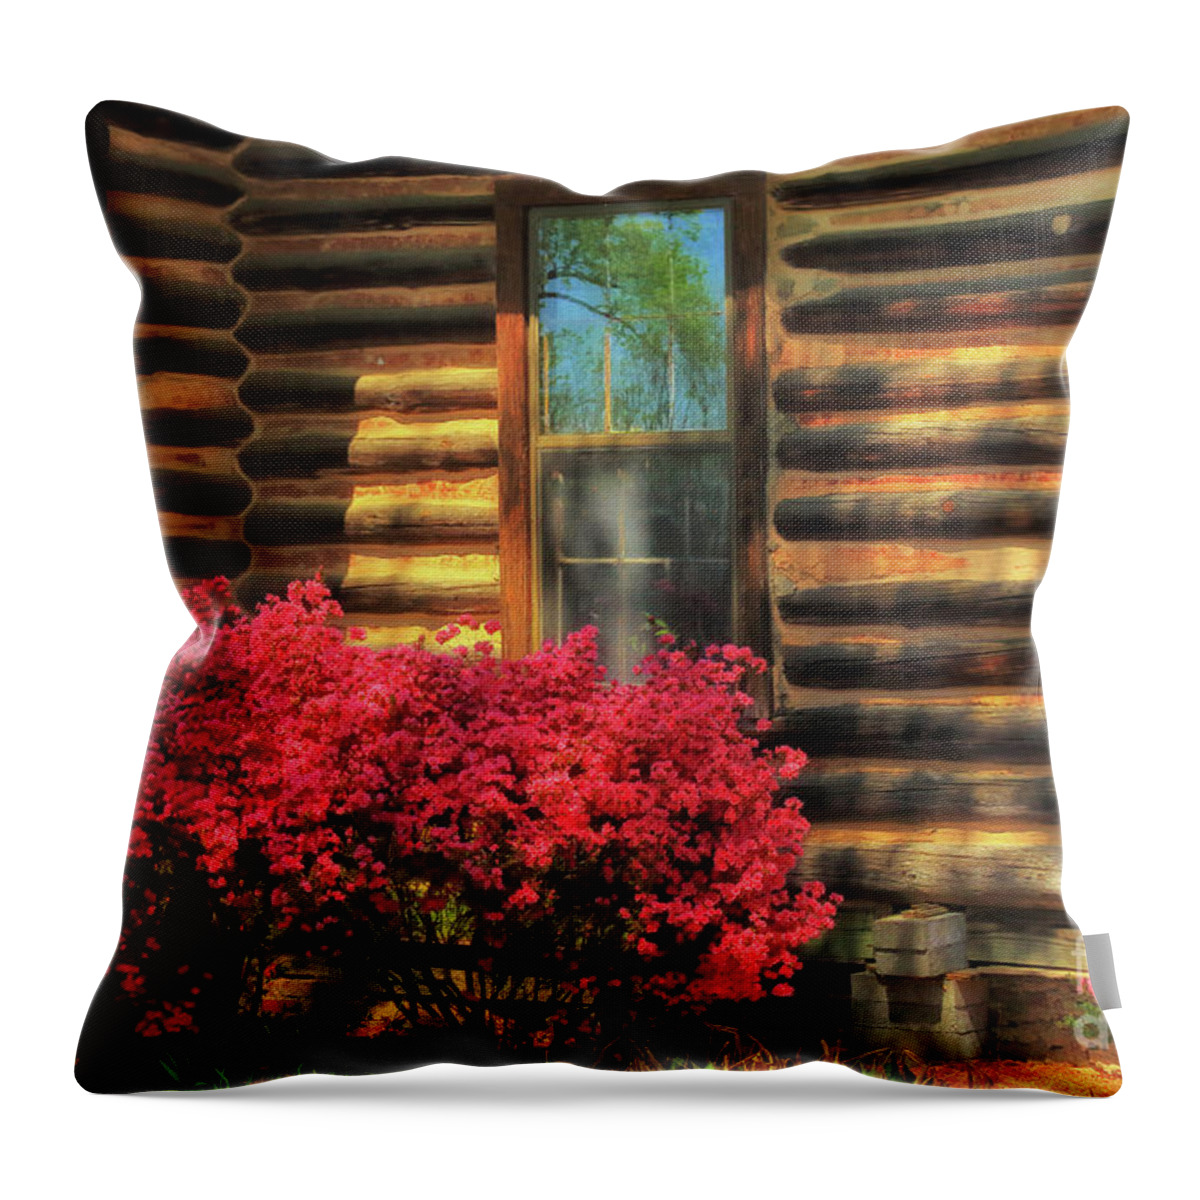 Log Cabin Throw Pillow featuring the photograph Cabin Delight by Geraldine DeBoer